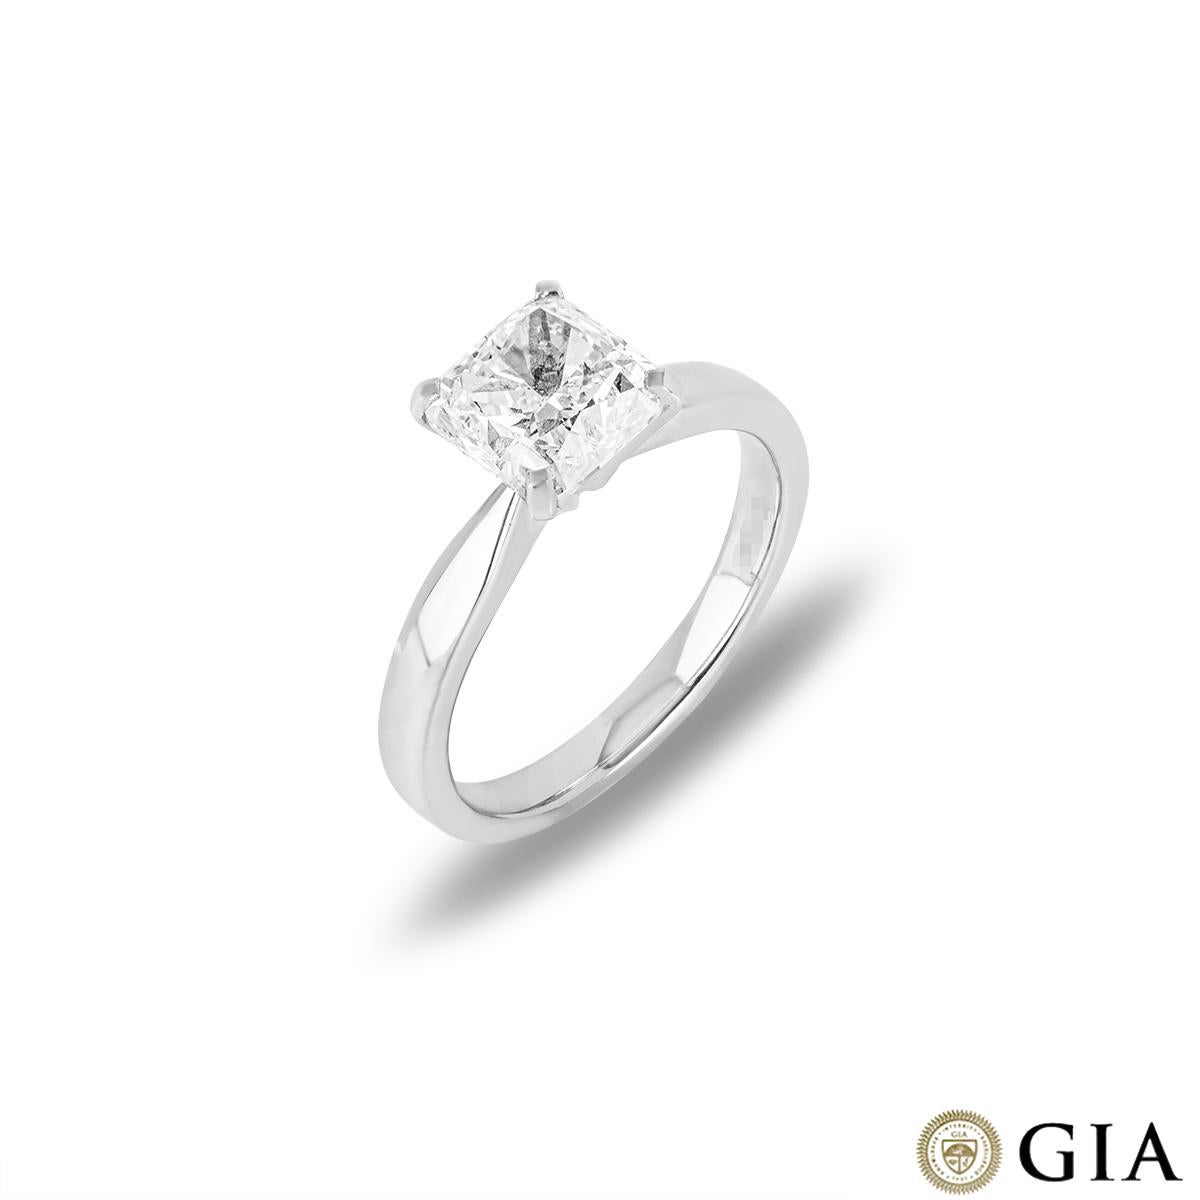 A stunning platinum cushion cut diamond engagement ring. The ring comprises of a cushion cut diamond in a four claw setting with a weight of 2.07ct, H in colour and VVS2 clarity. The ring has a gross weight of 5.50 grams and is currently a size UK